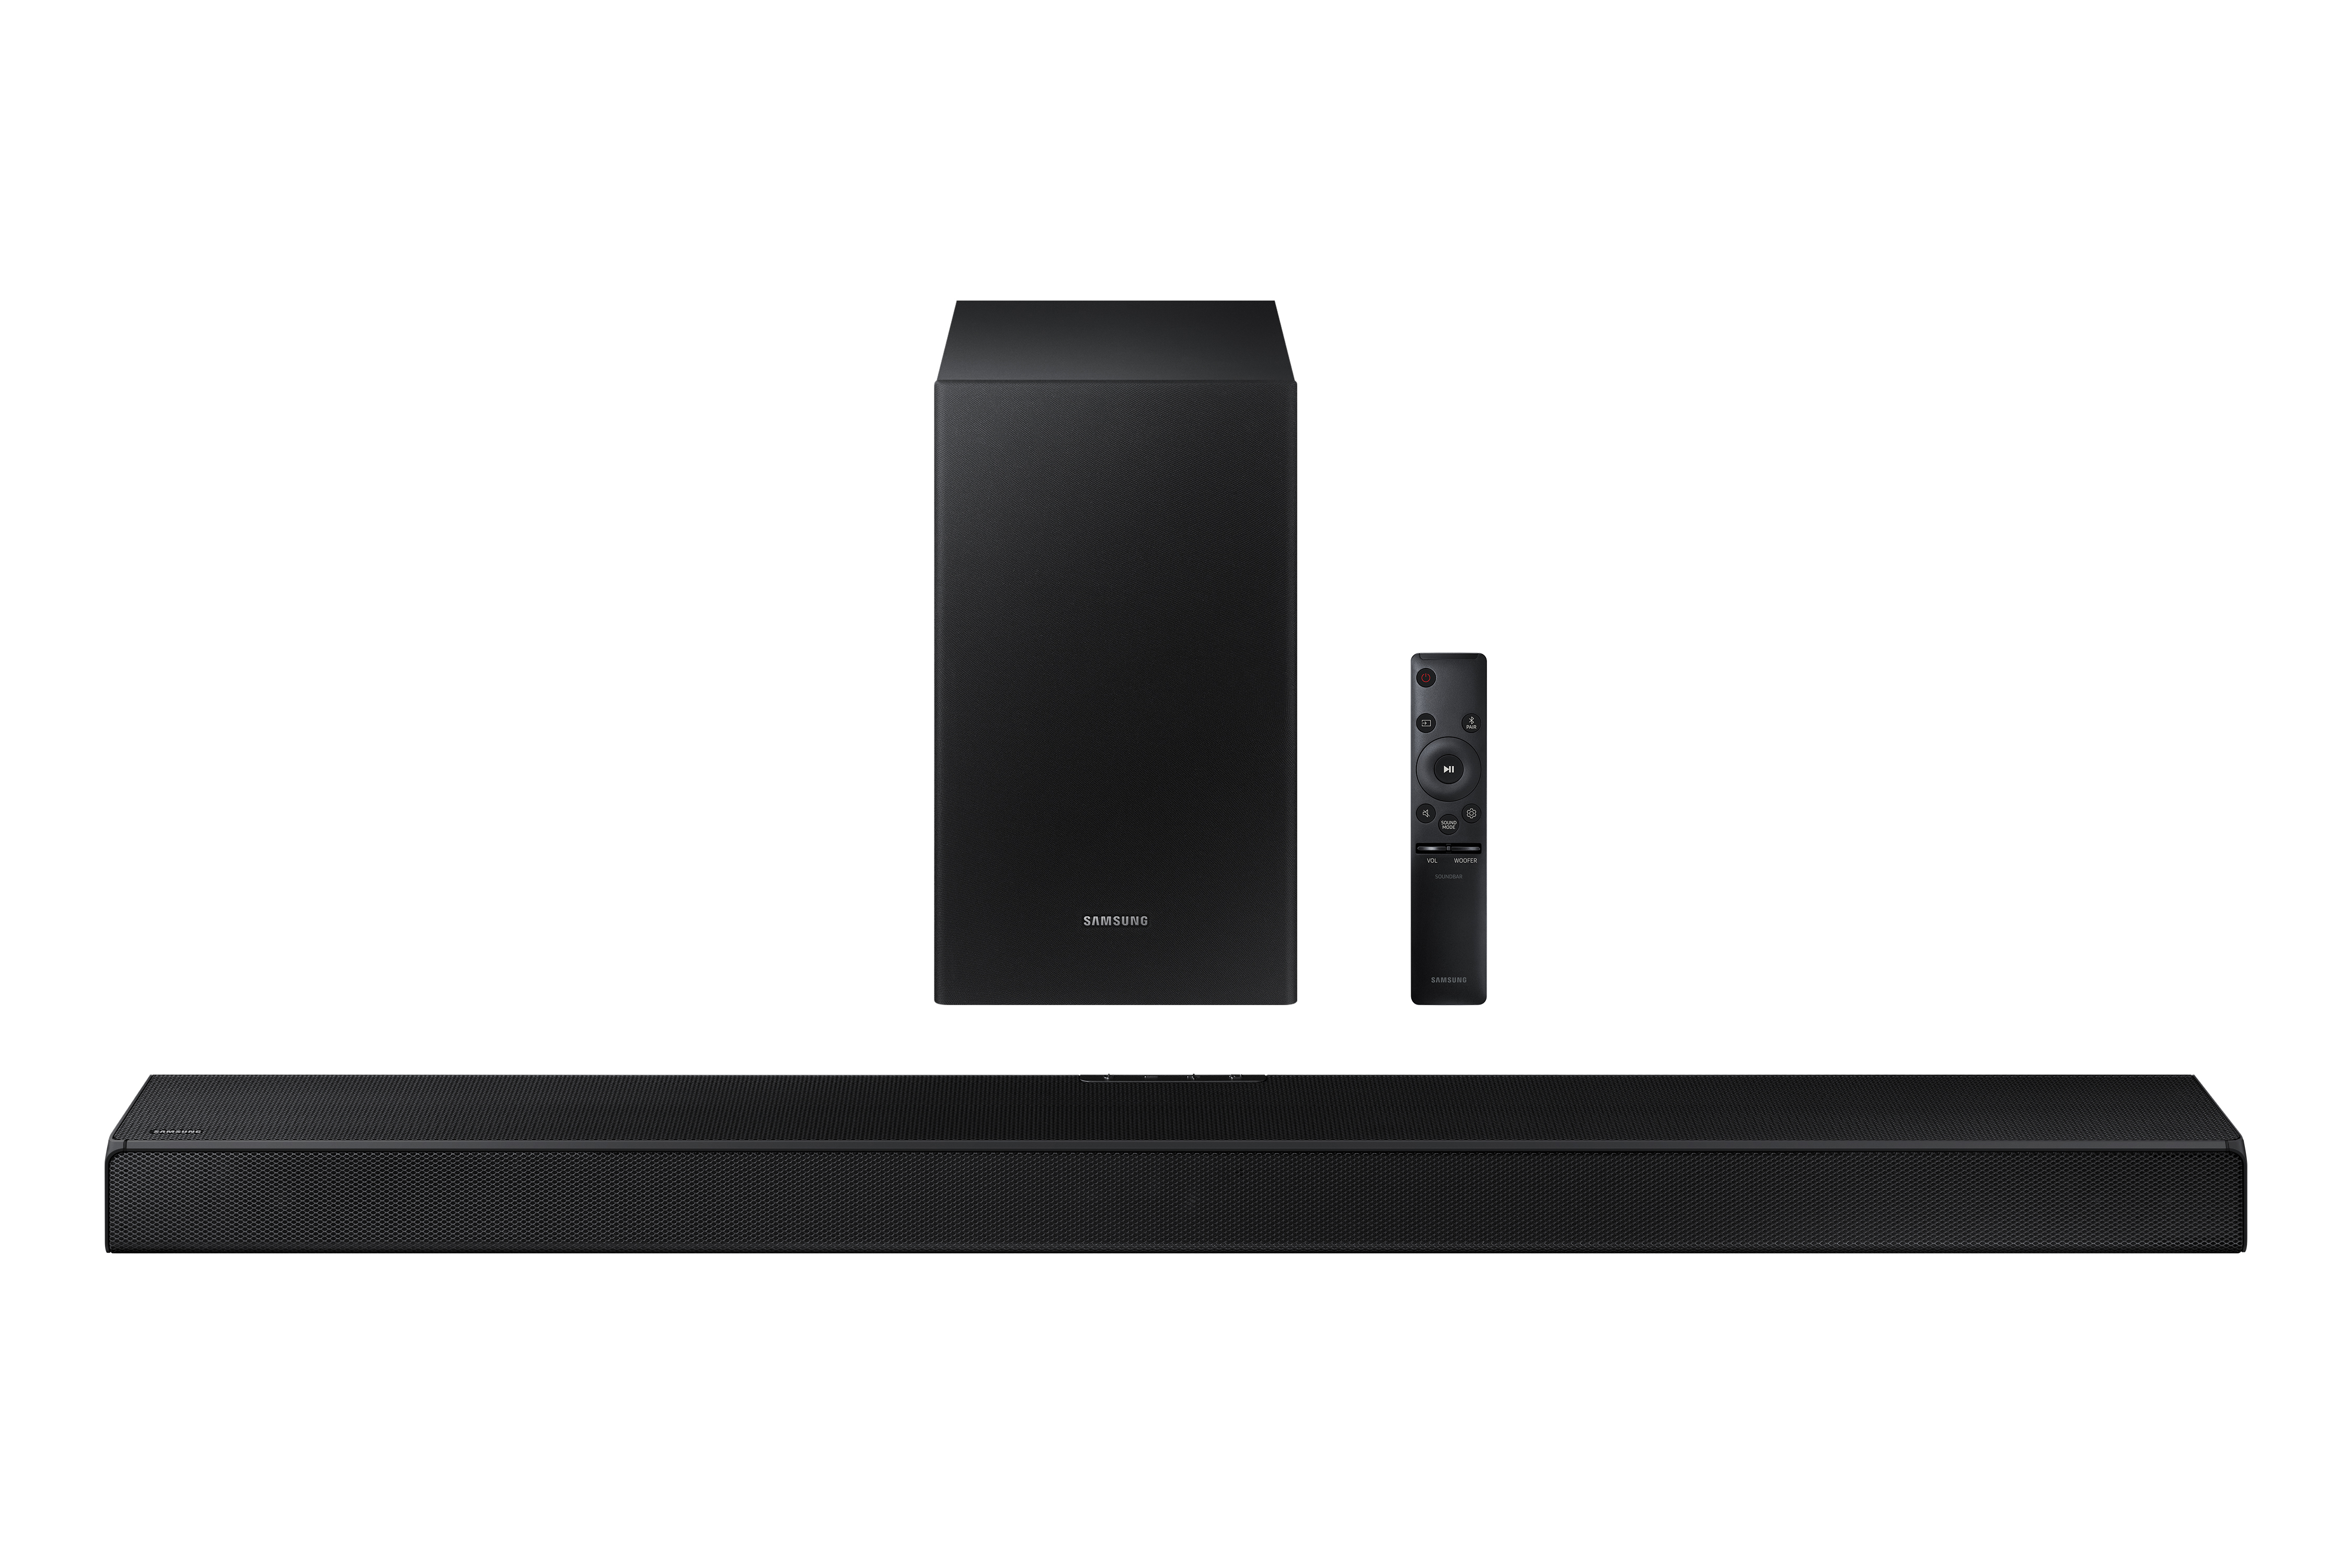 SAMSUNG HW-A60M 3.1 Channel Soundbar with Wireless Subwoofer and Dolby 5.1 / DTS Virtual:X - image 1 of 5